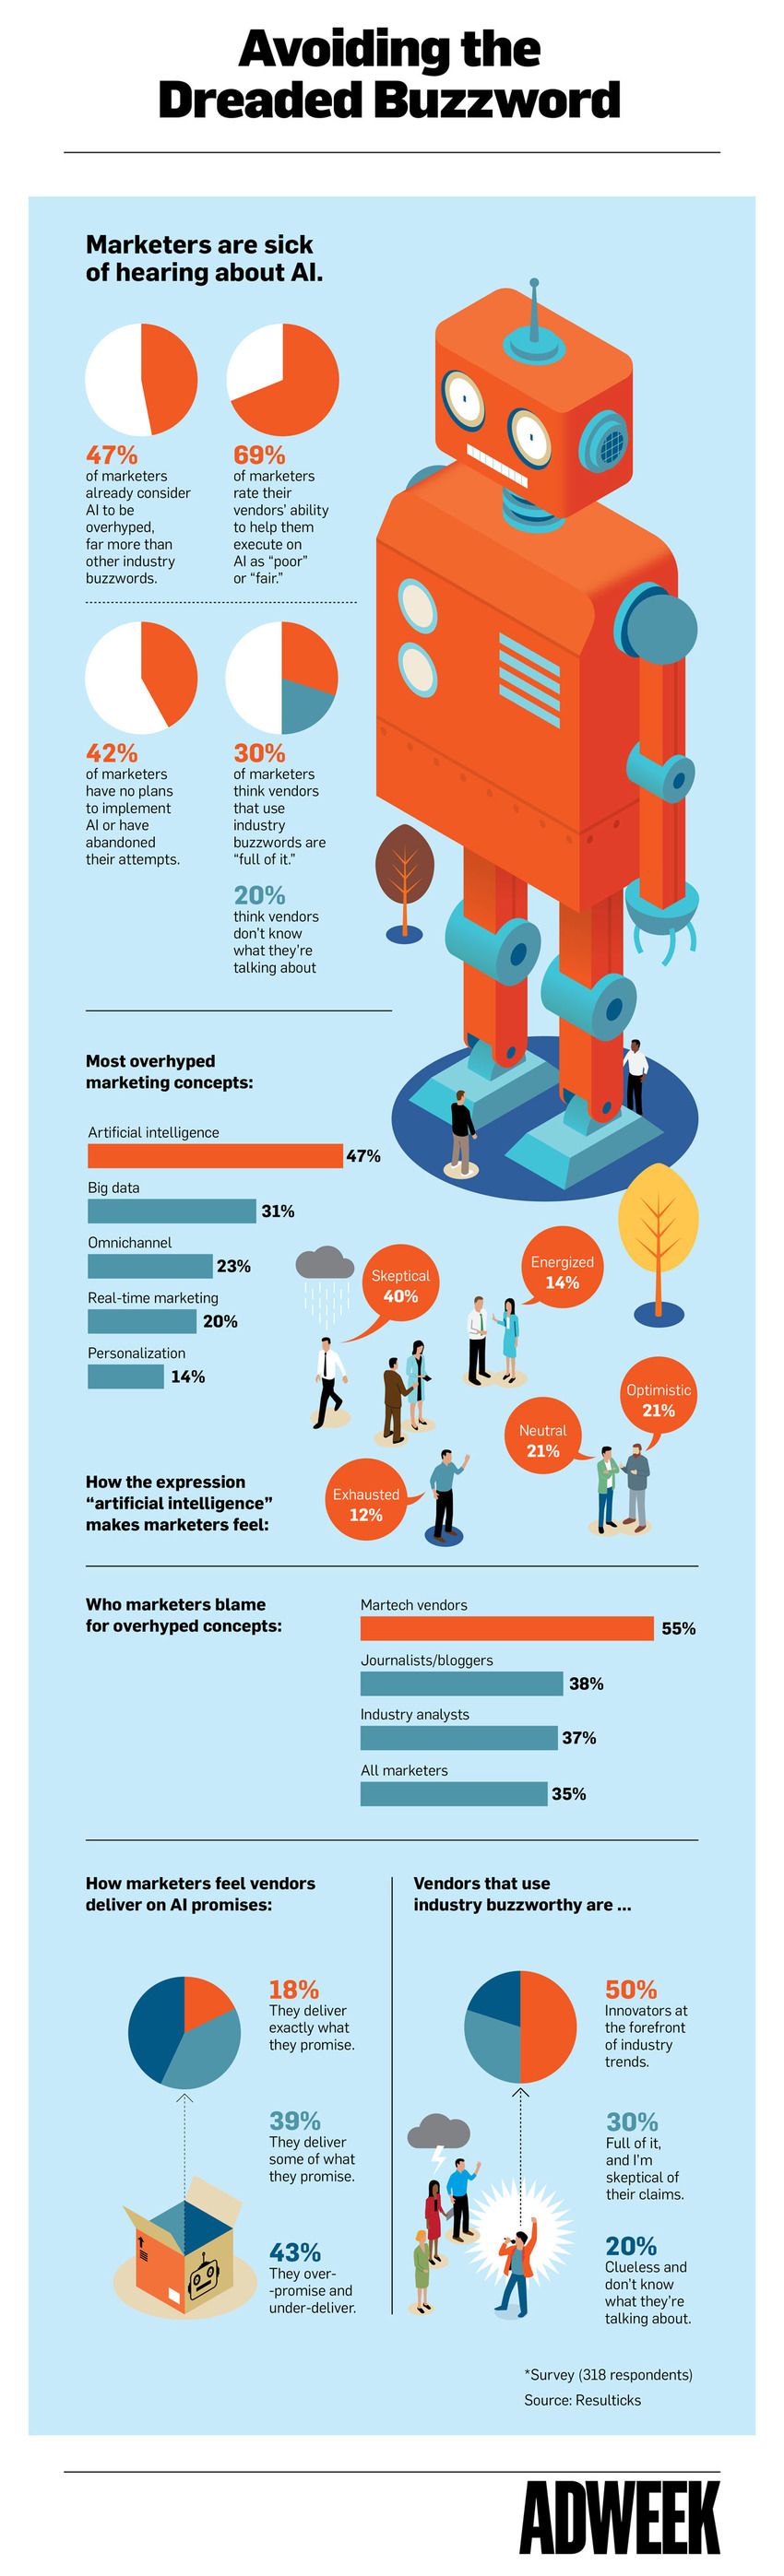 Infographic: What Marketers Really Think About Artificial Intelligence - AdWeek | The MarTech Digest | Scoop.it